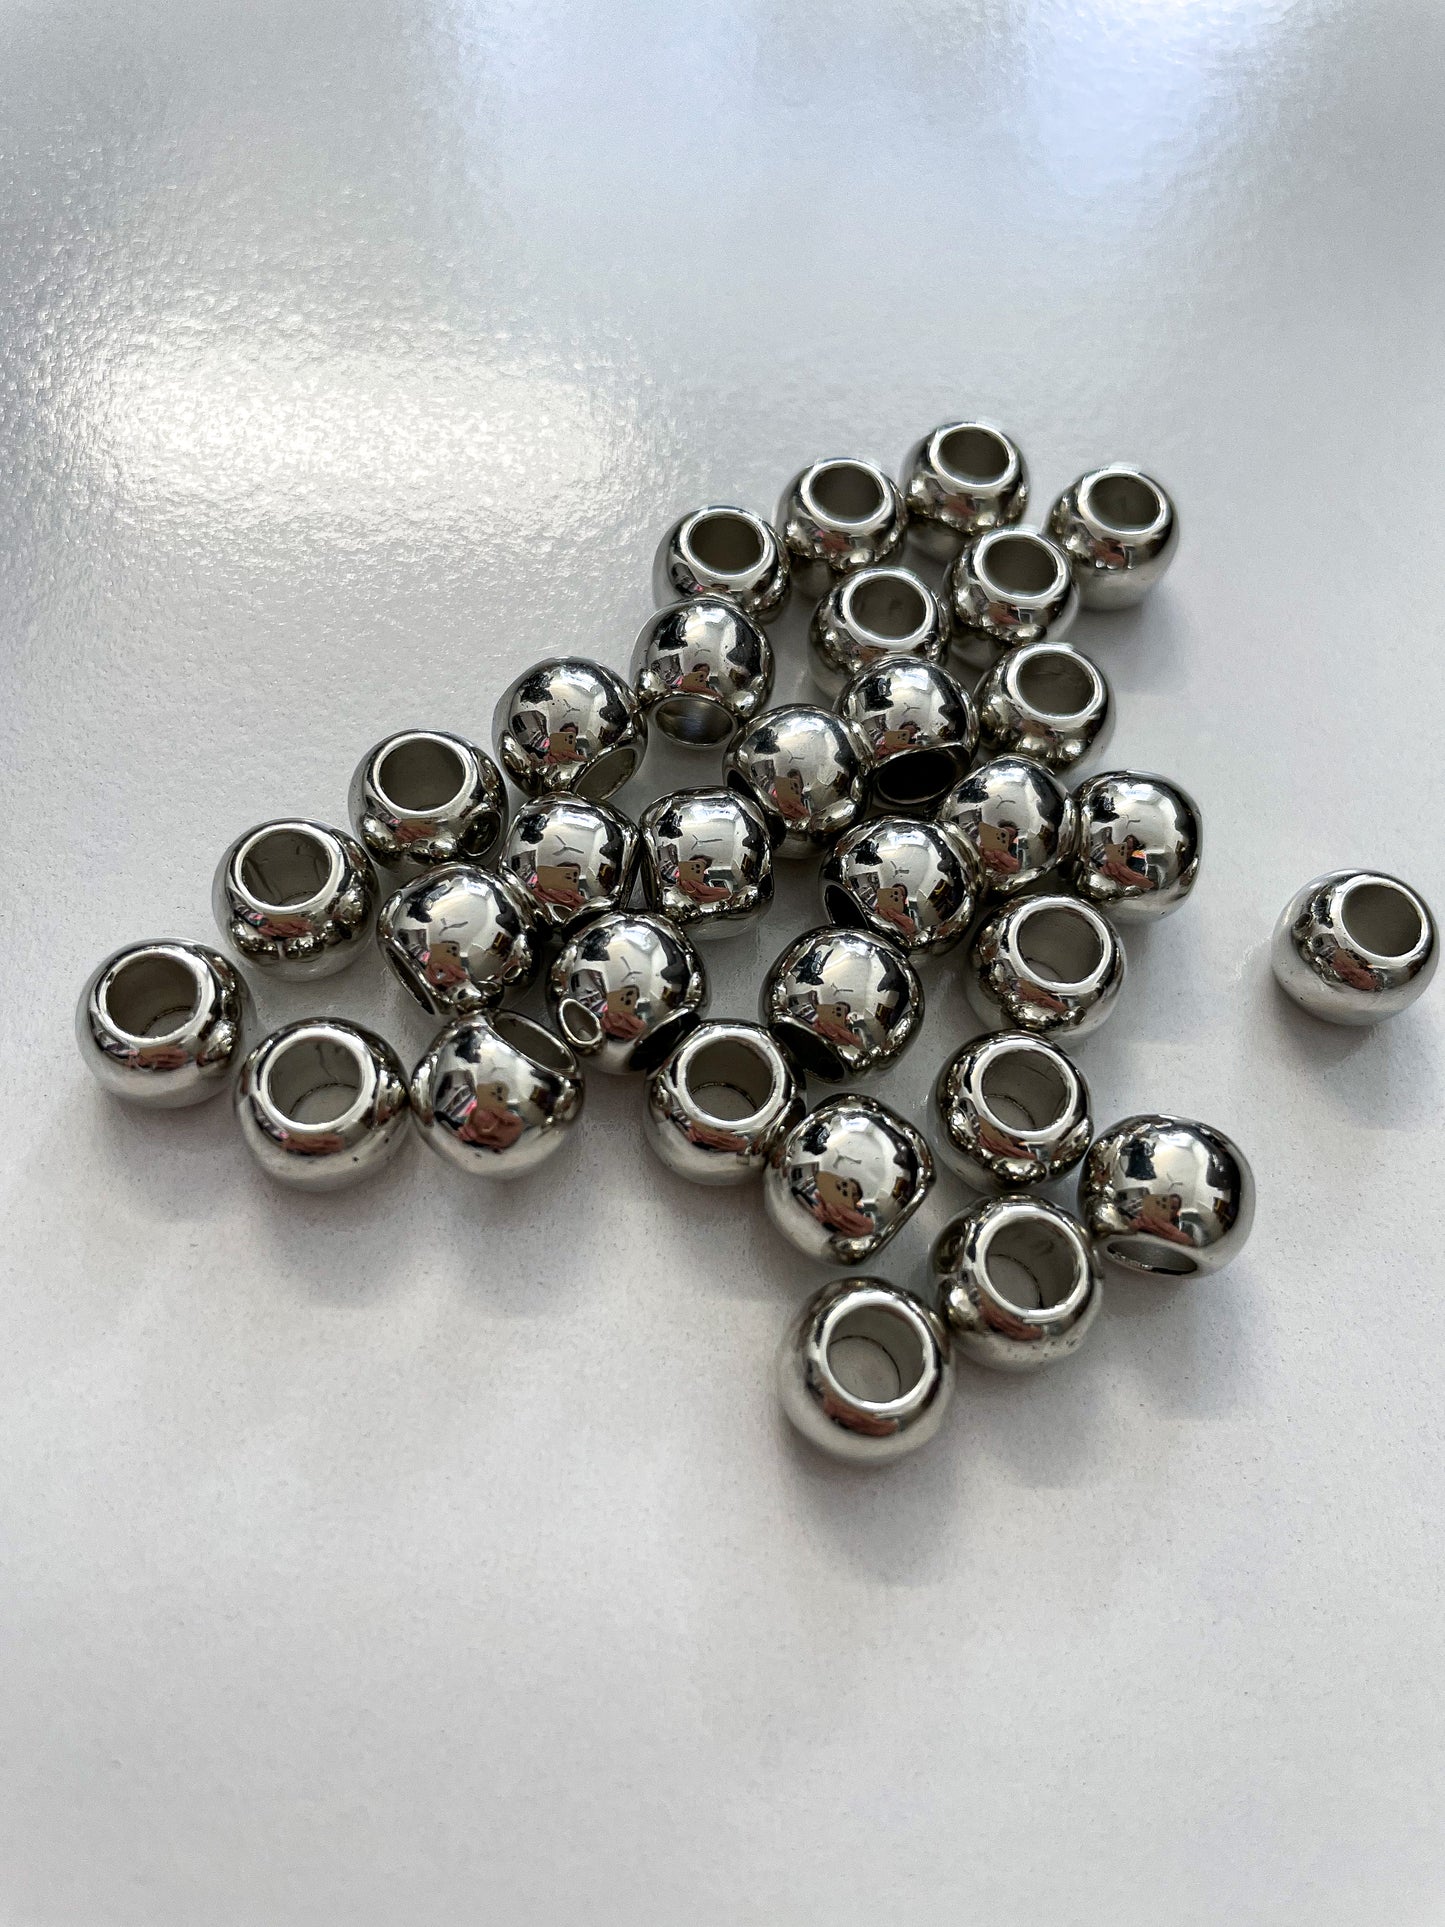 Beads (silver, black, rose gold, white, clear)